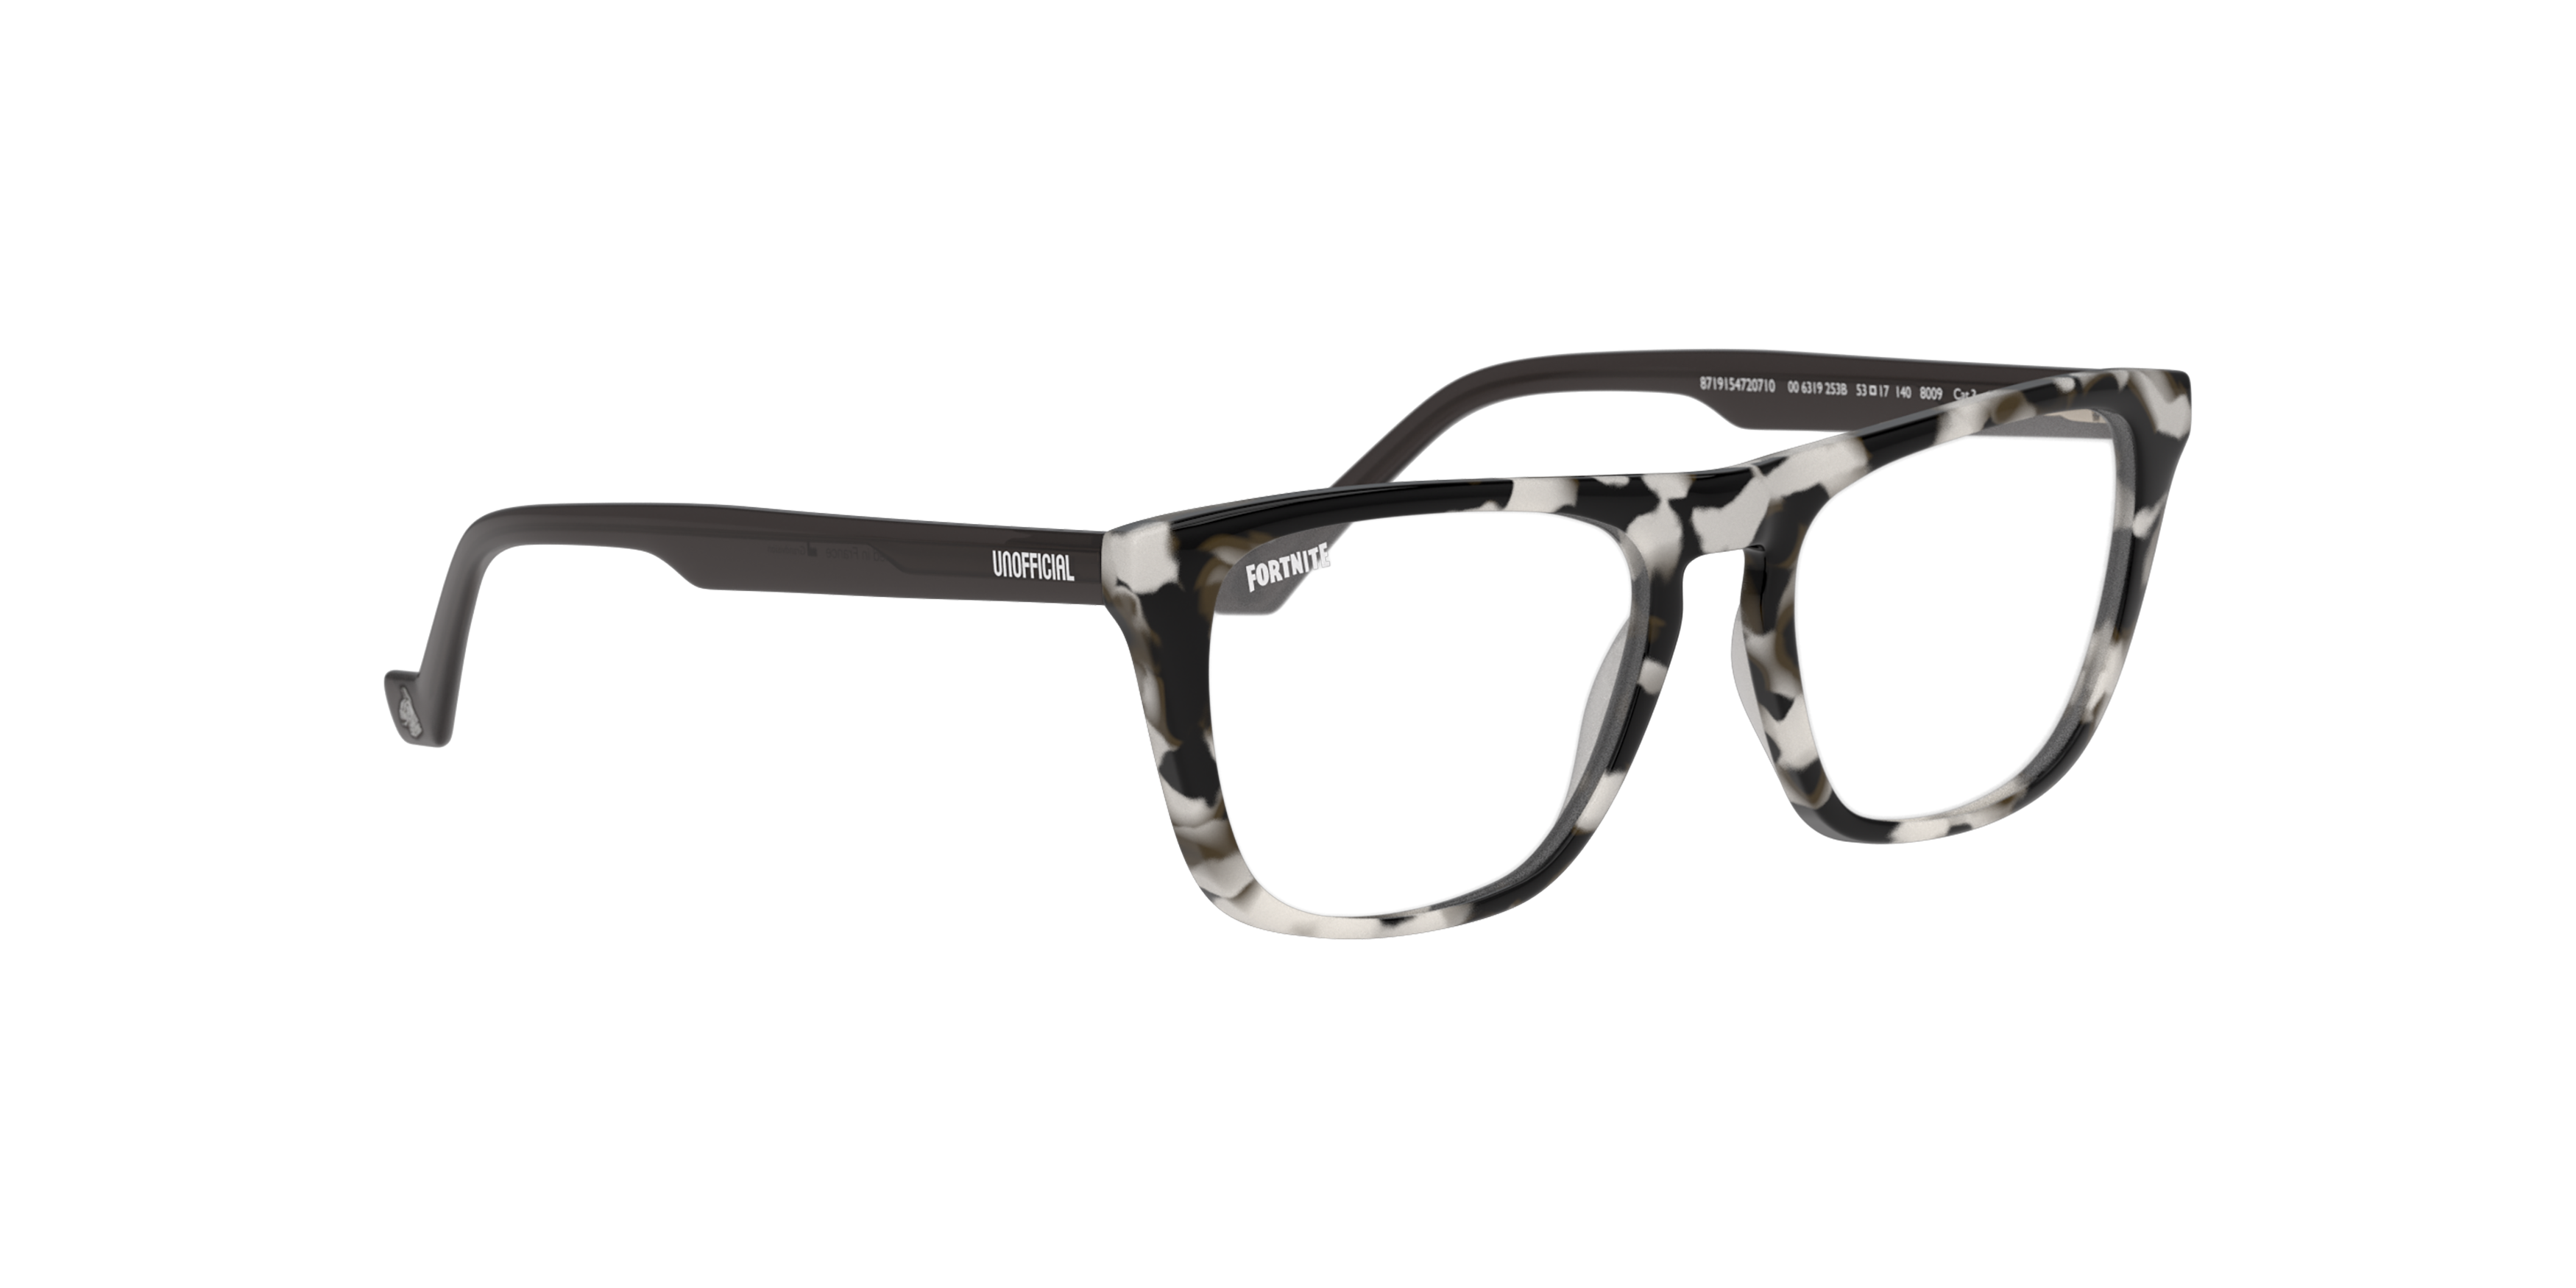 Angle_Right01 Fortnite with Unofficial UNSU0157 Glasses Transparent / Grey